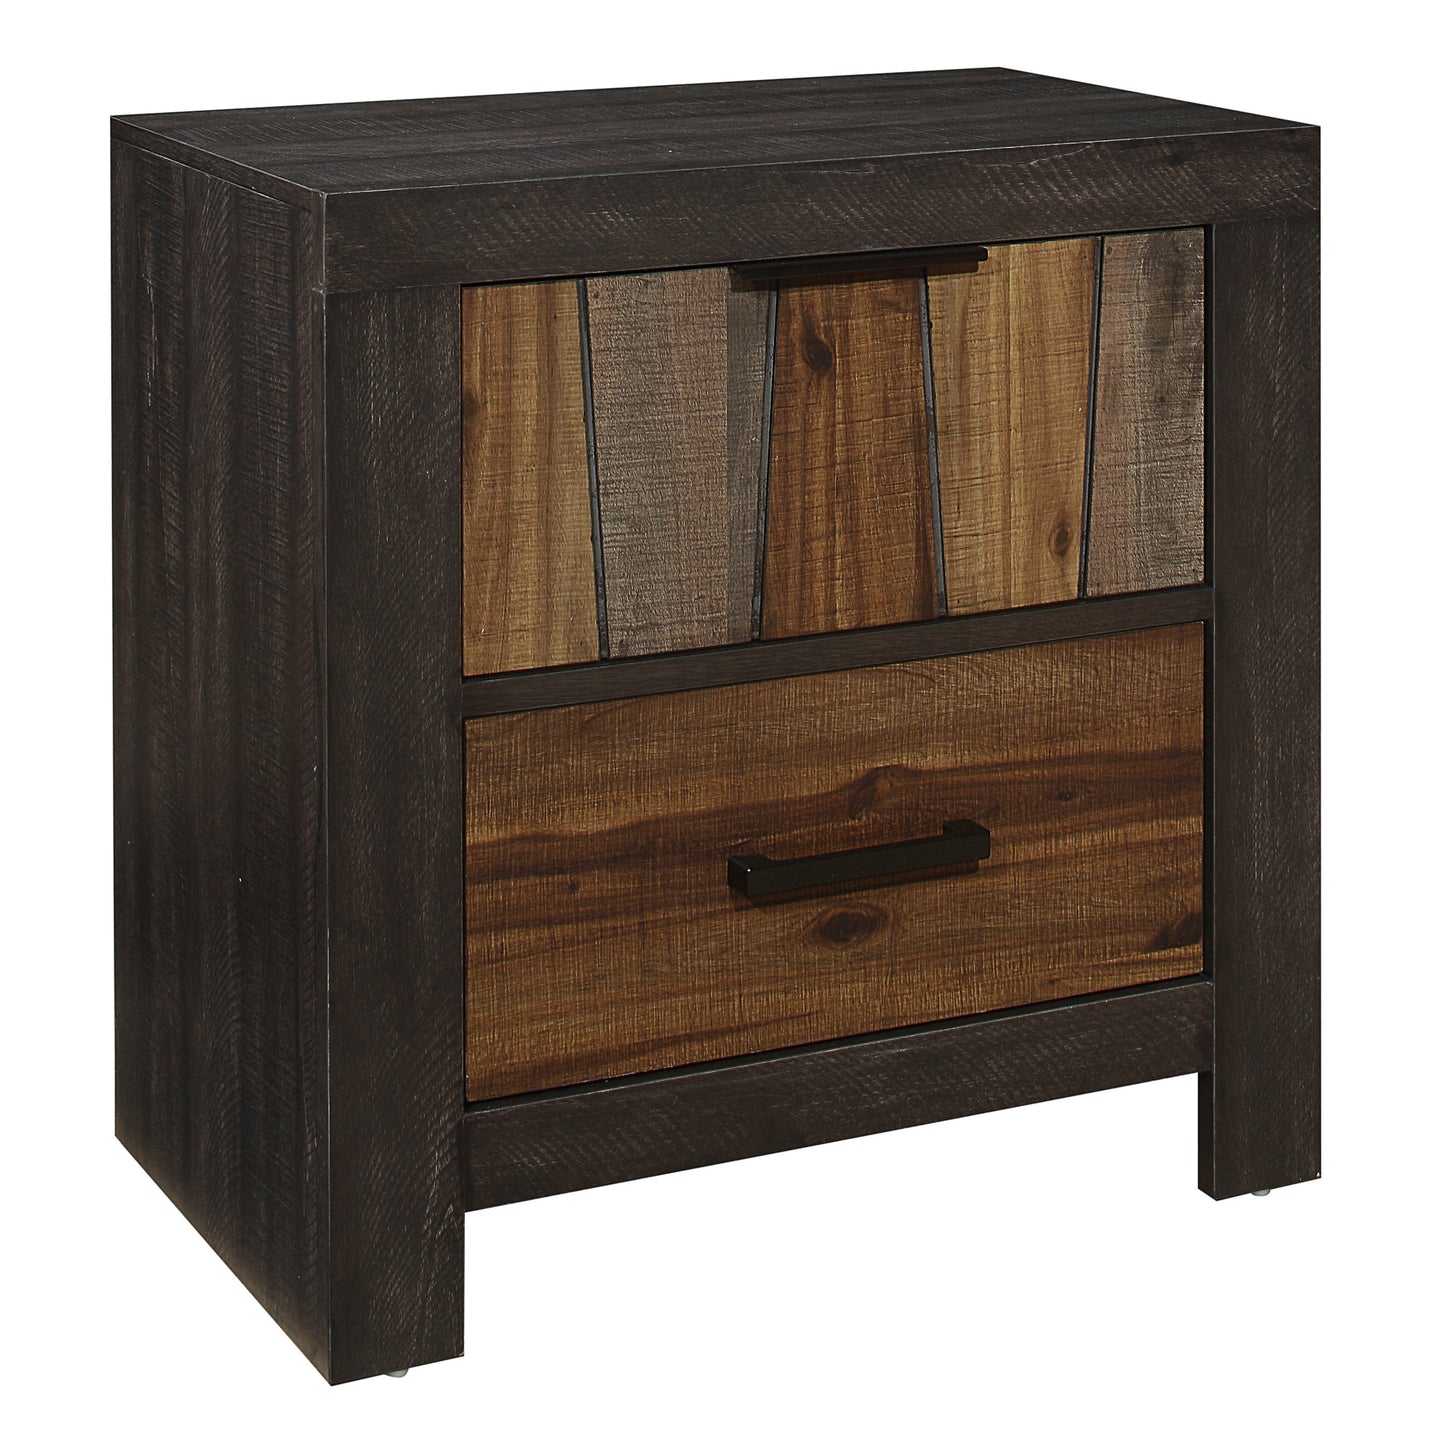 Unique Style Nightstand with two drawers